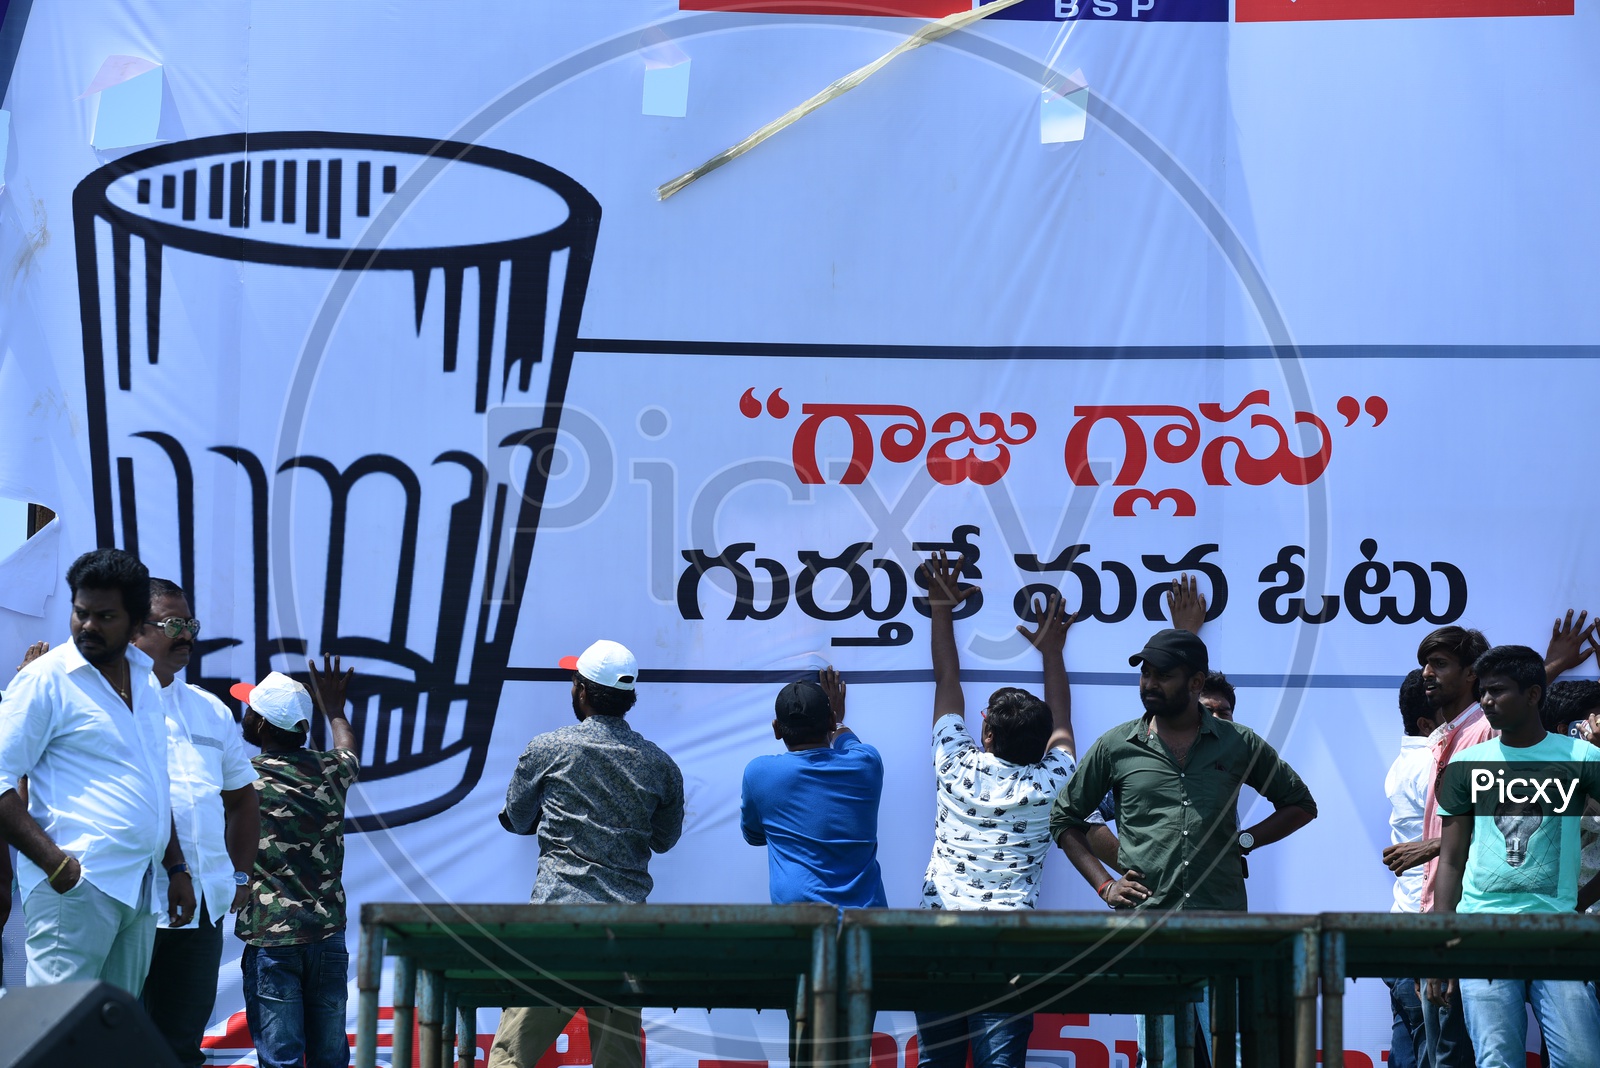 Jana Sena party supporters setting up the banner at an election campaign in Amalapuram